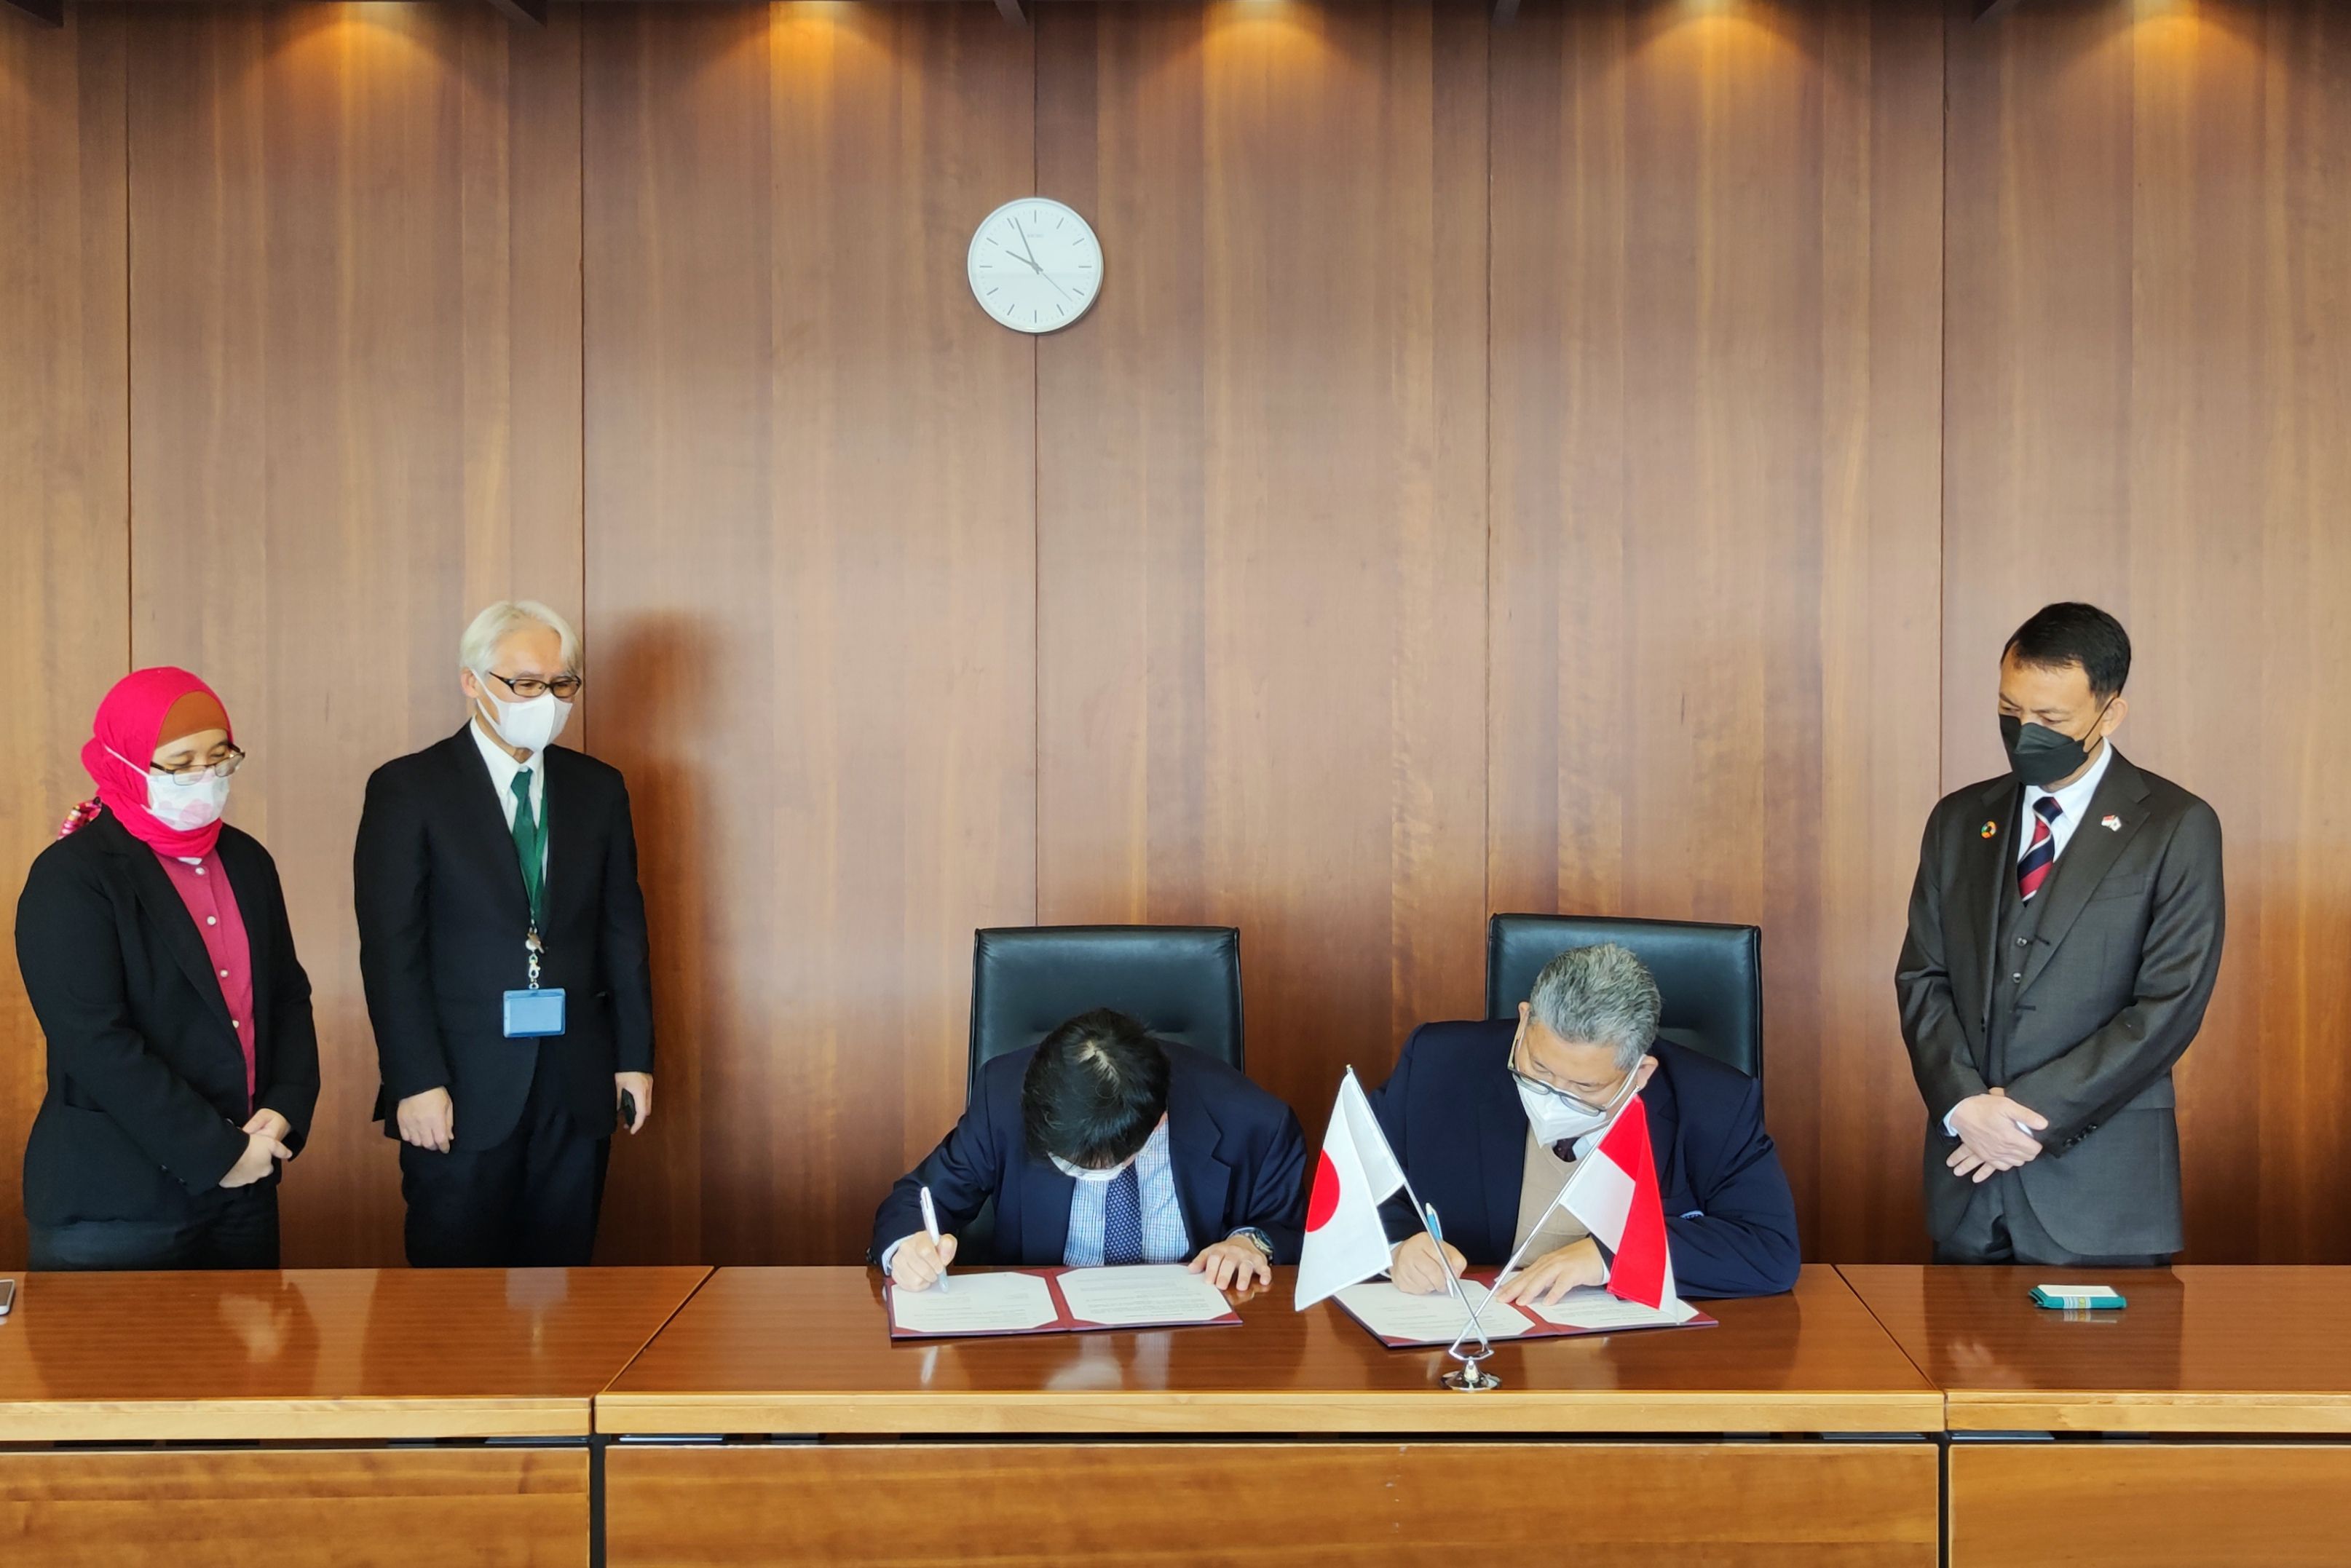 MoA Renewal Signing Ceremony for Indonesia Field Practice